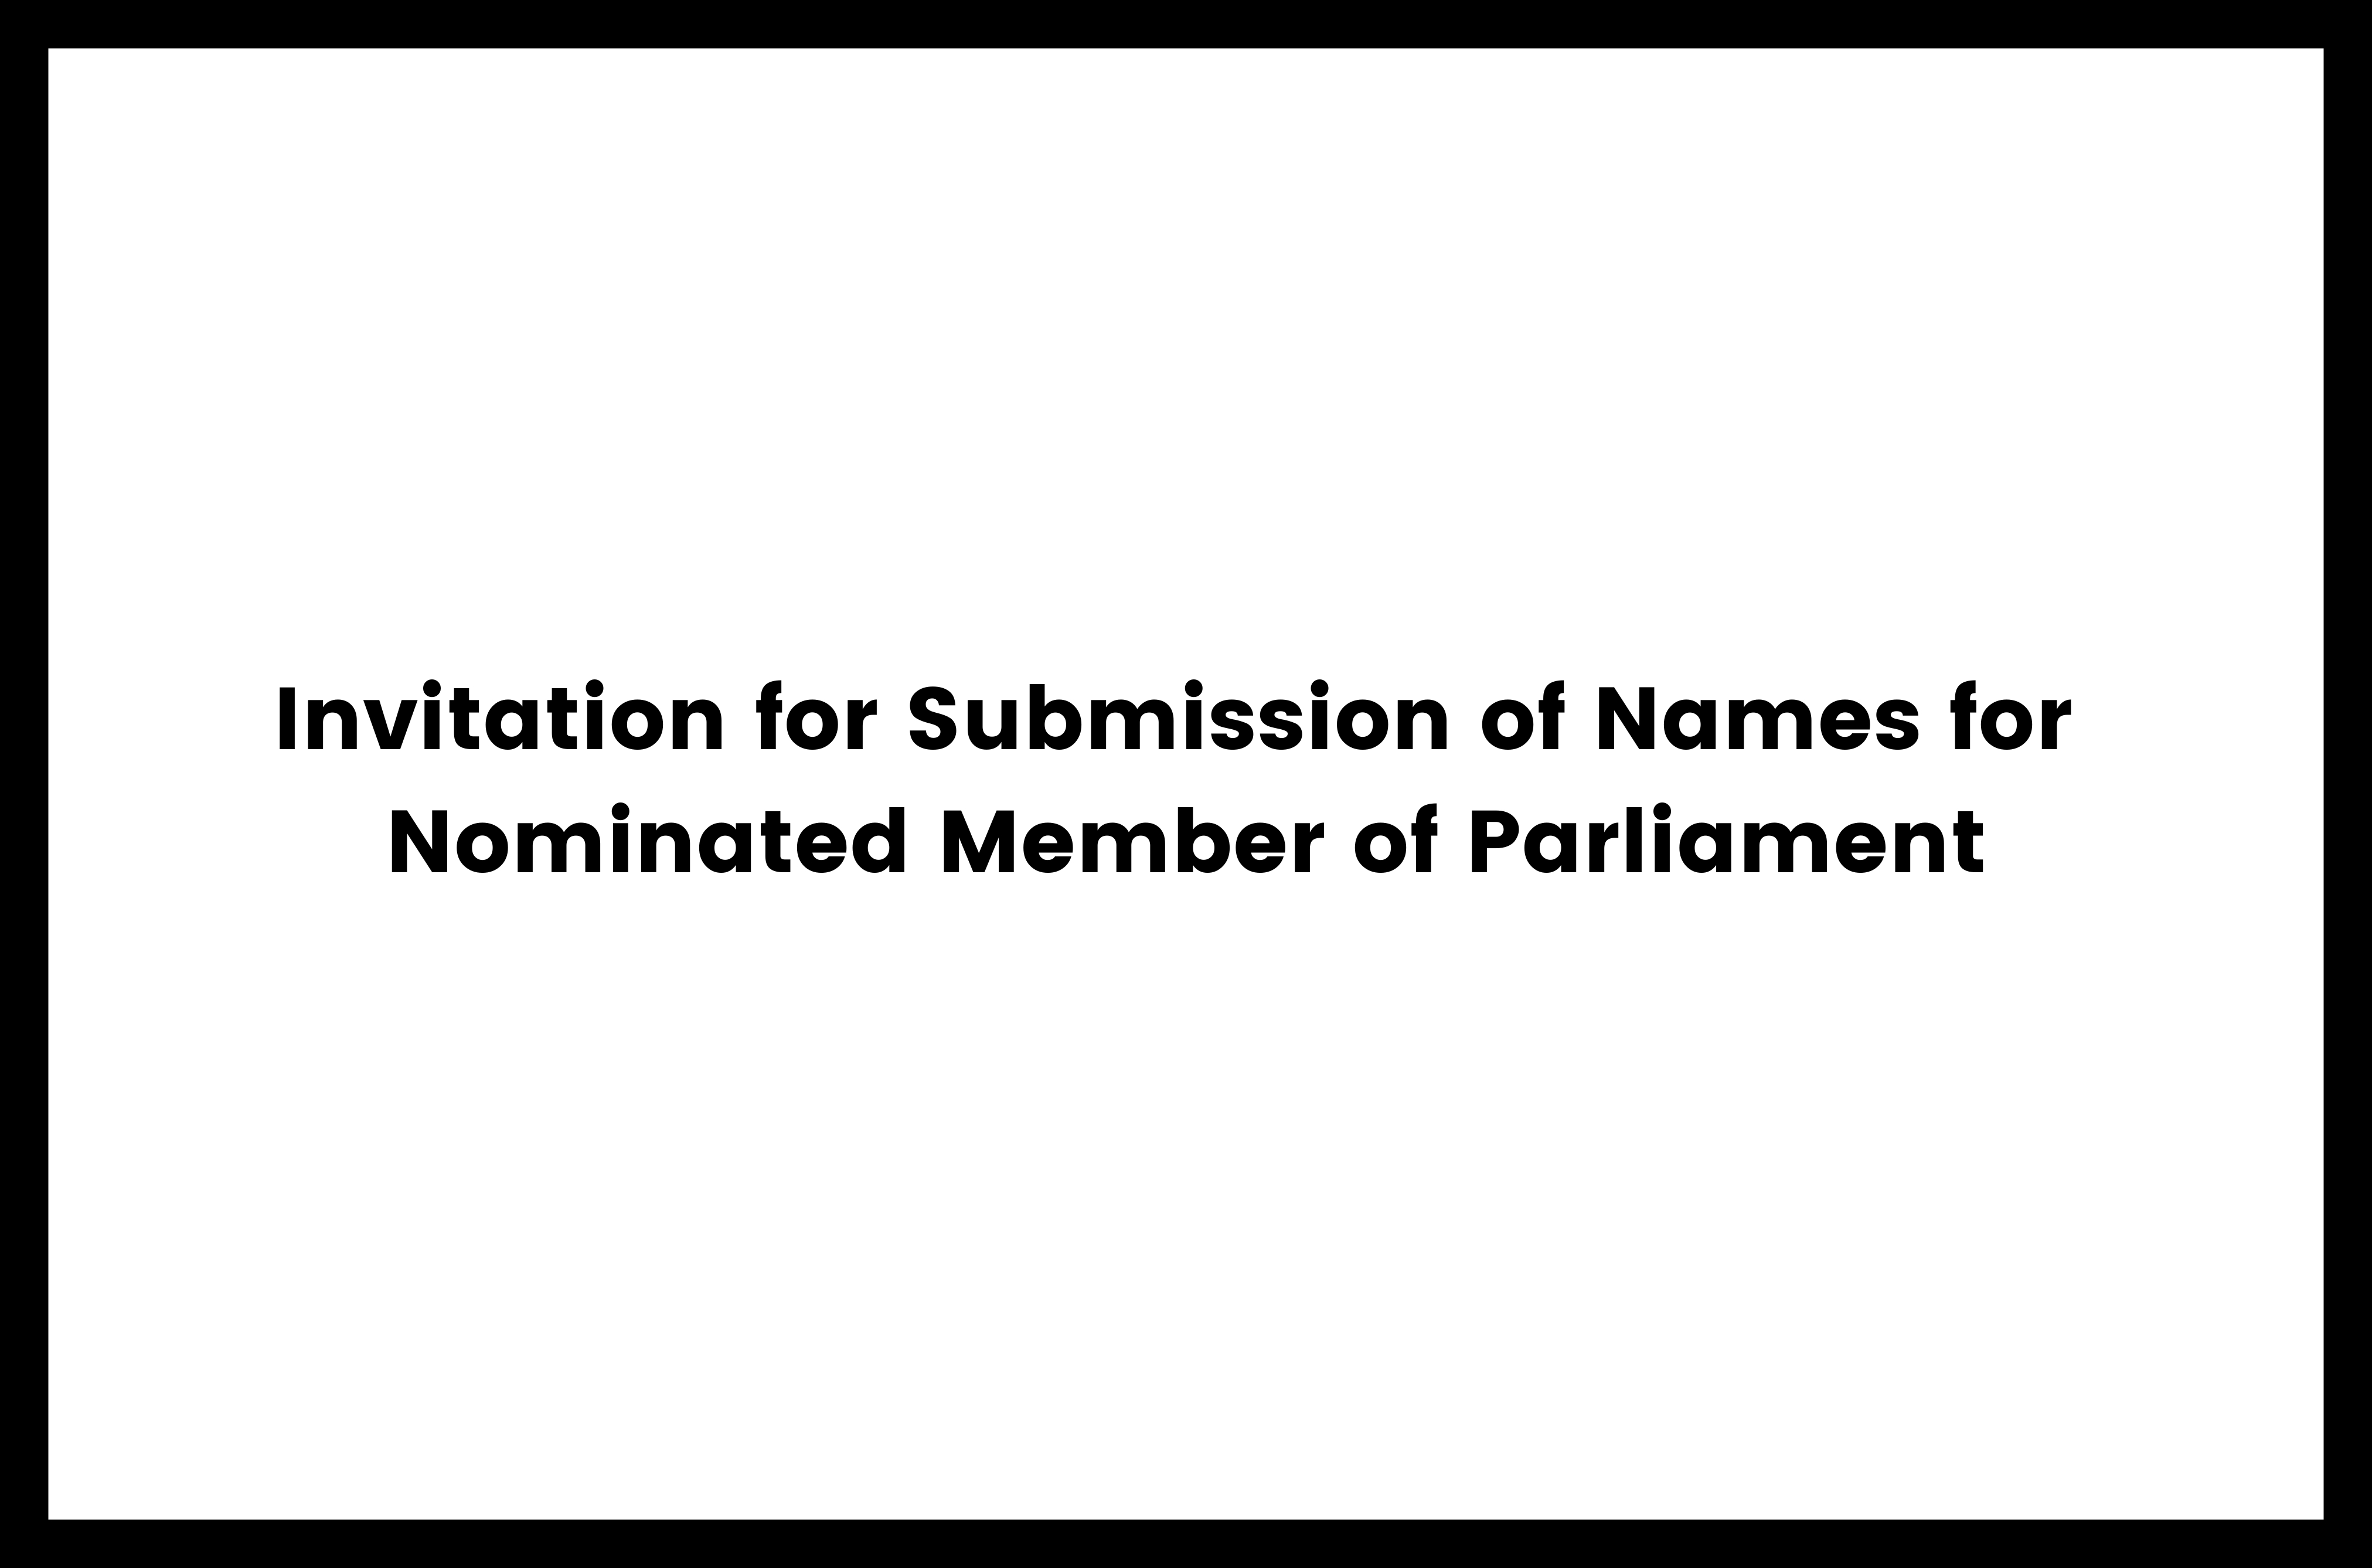 Invitation for Submission of Names for Nominated MP